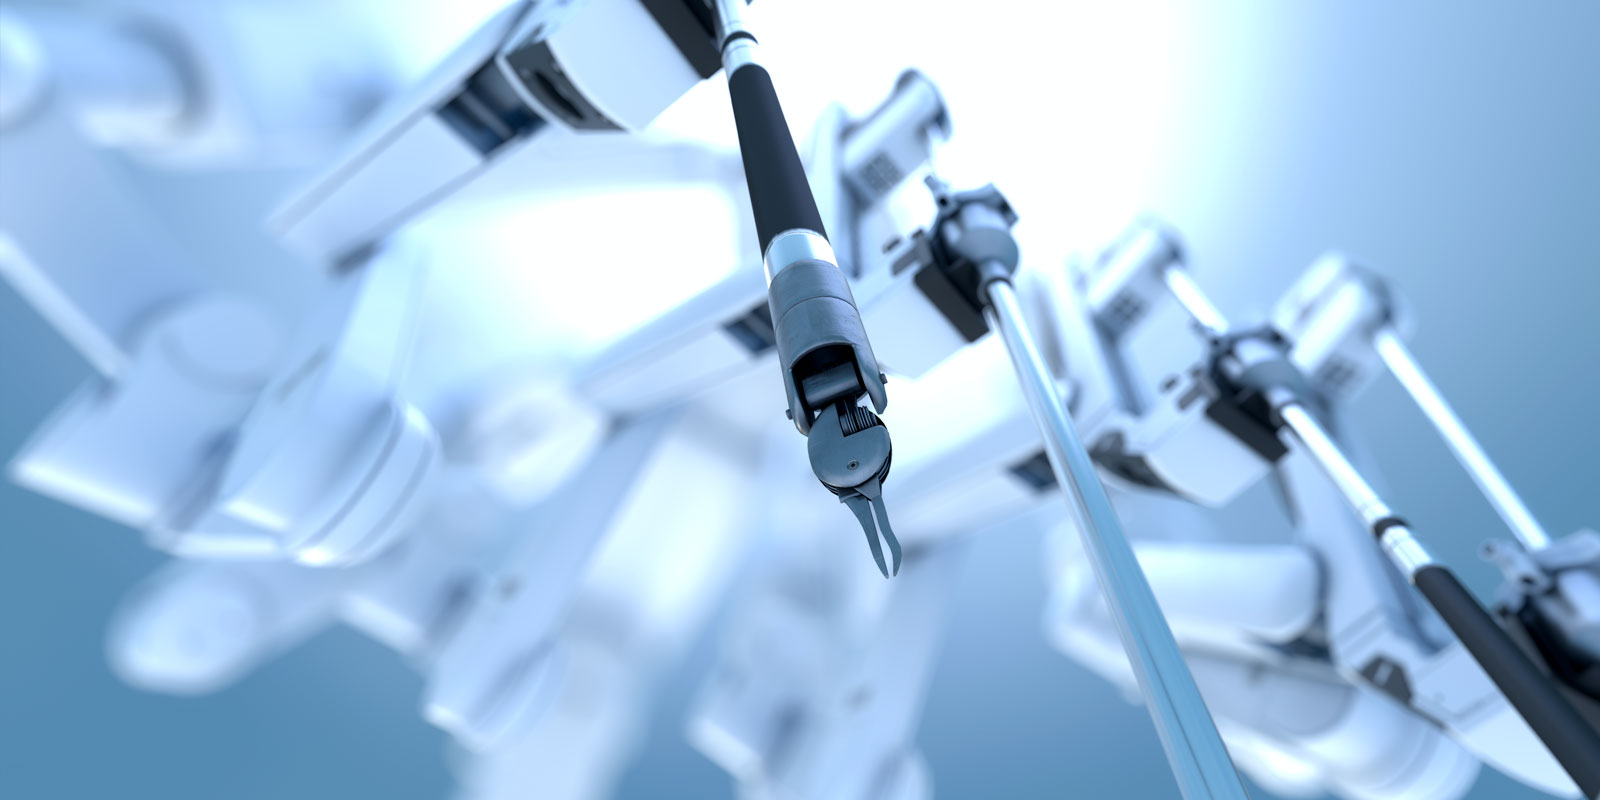 Helping Robots Acquire Steadier Hands for Surgery